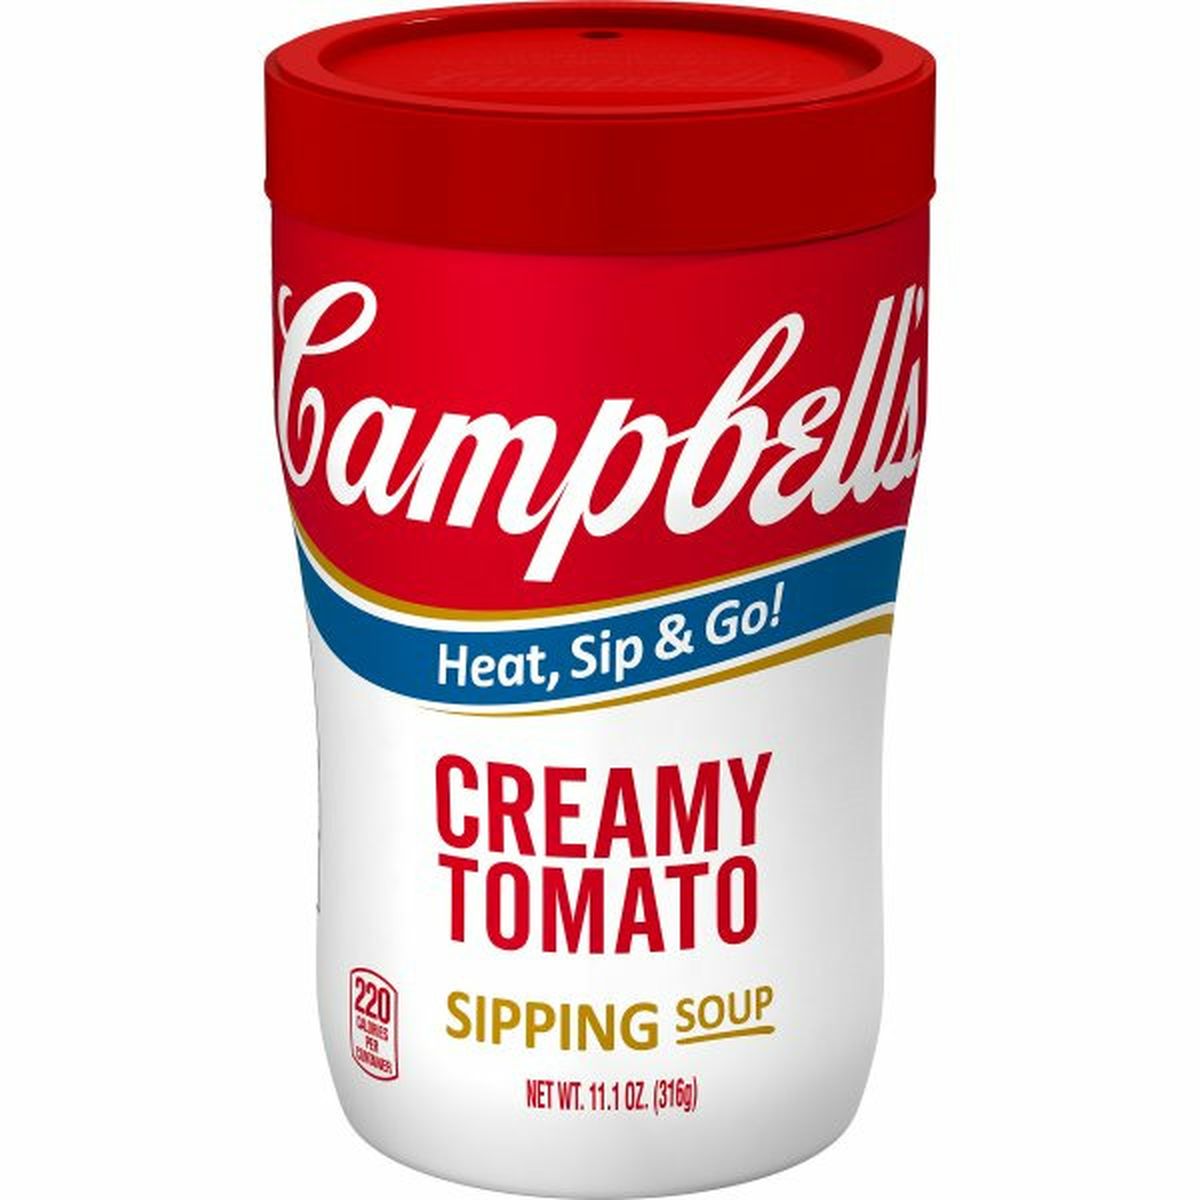 Calories in Campbell'ss Creamy Tomato Soup